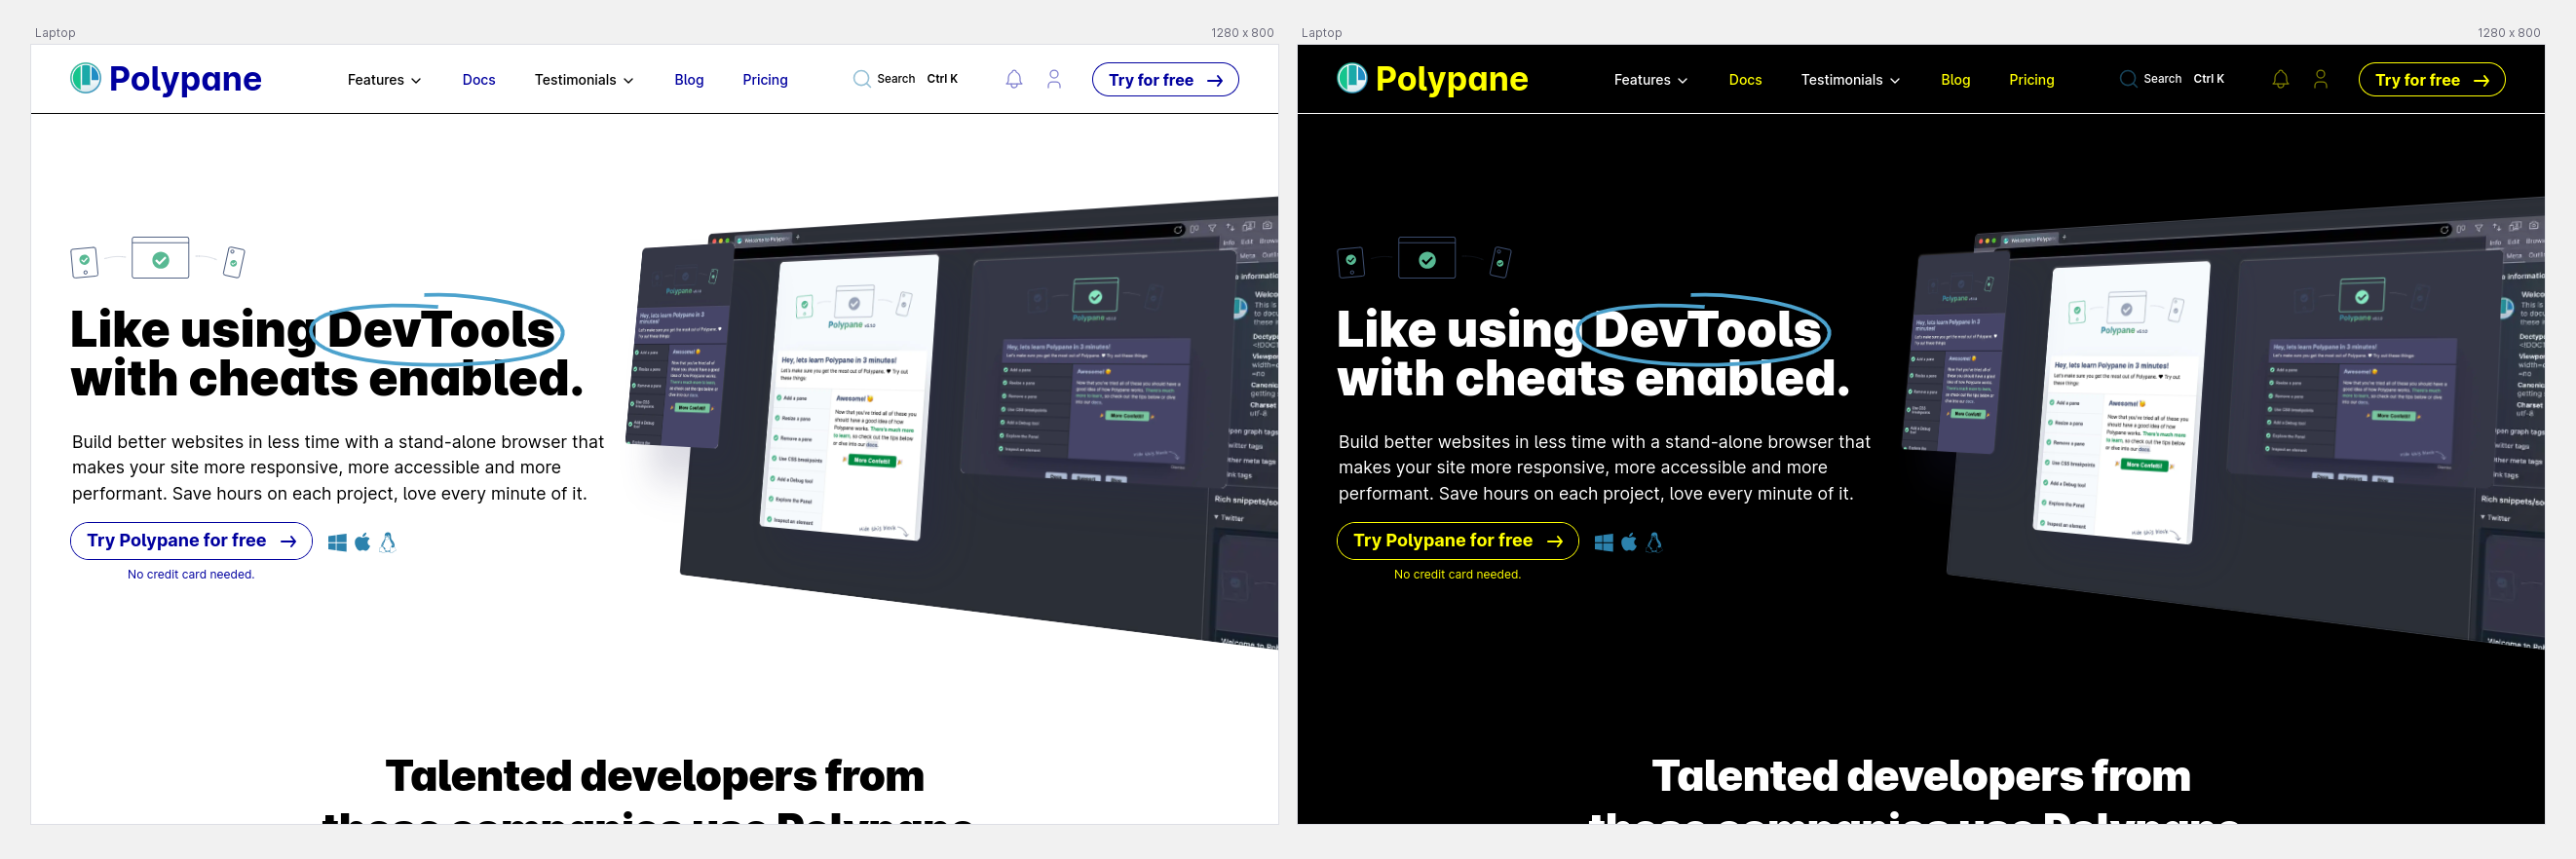 The polypane website in two panes, the left pane showing a light forced color theme and the right pane showing a dark forced color theme.